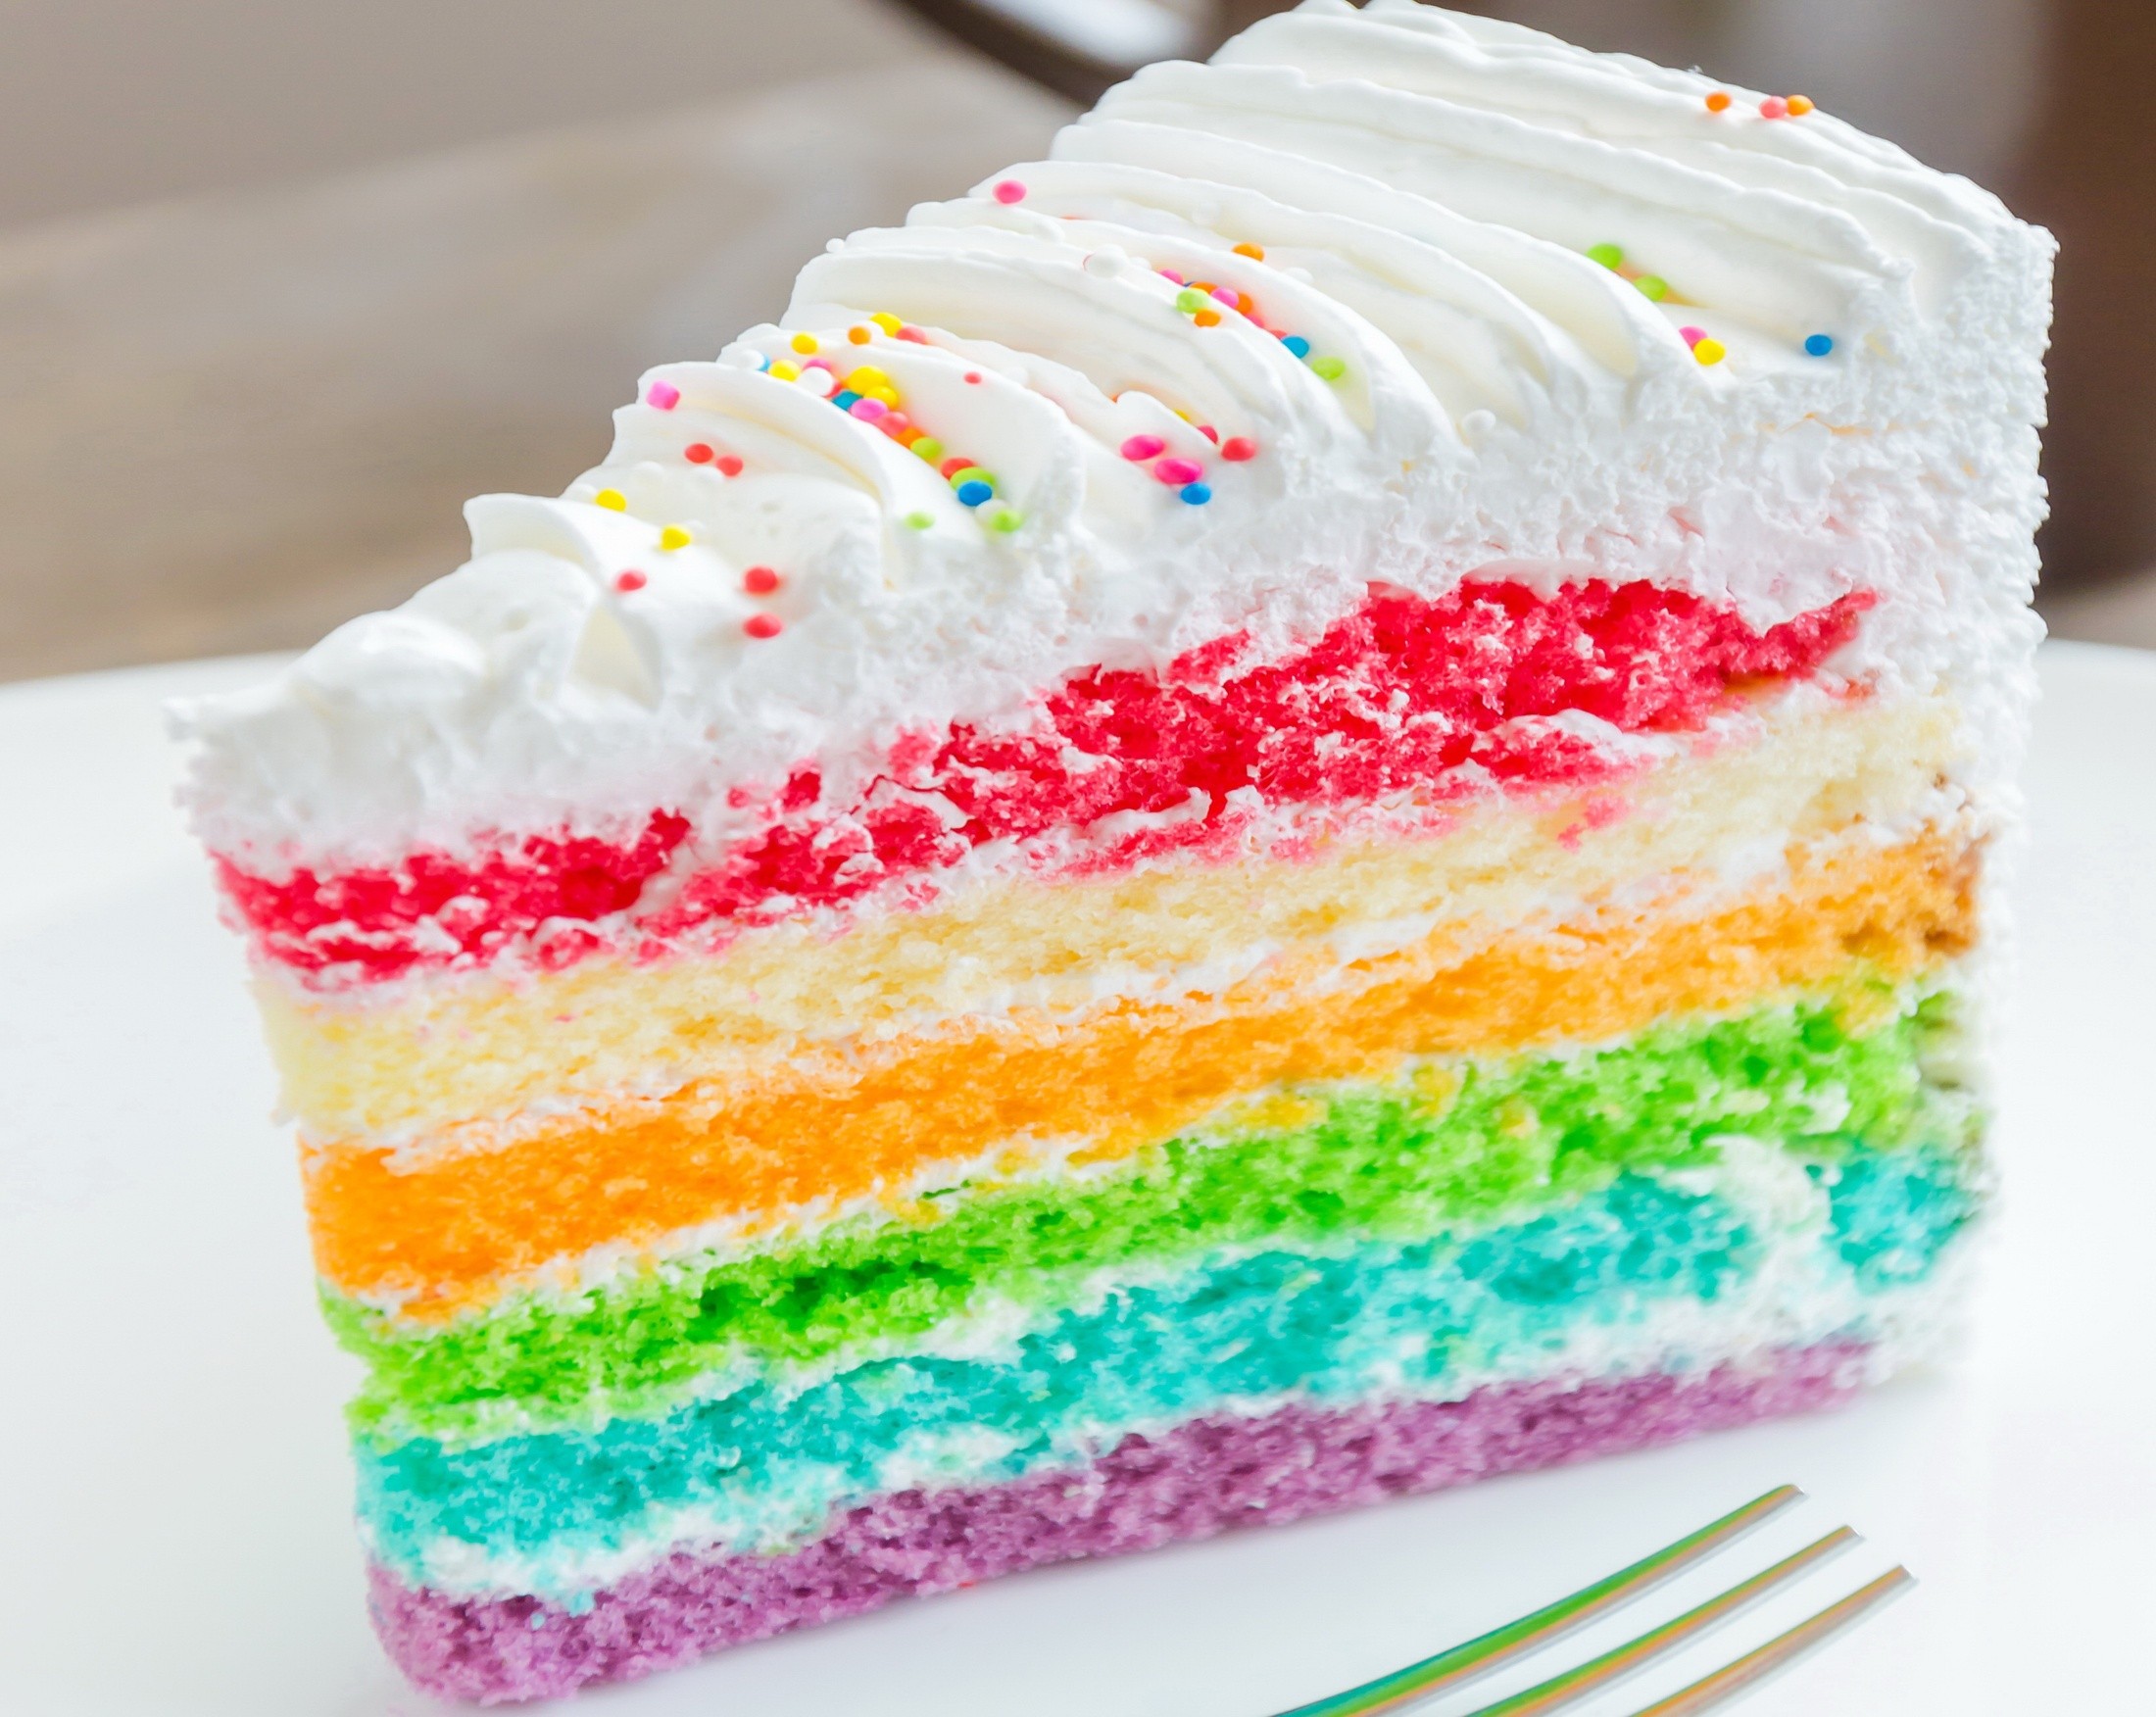 General 2200x1752 food cake colorful rainbows sweets